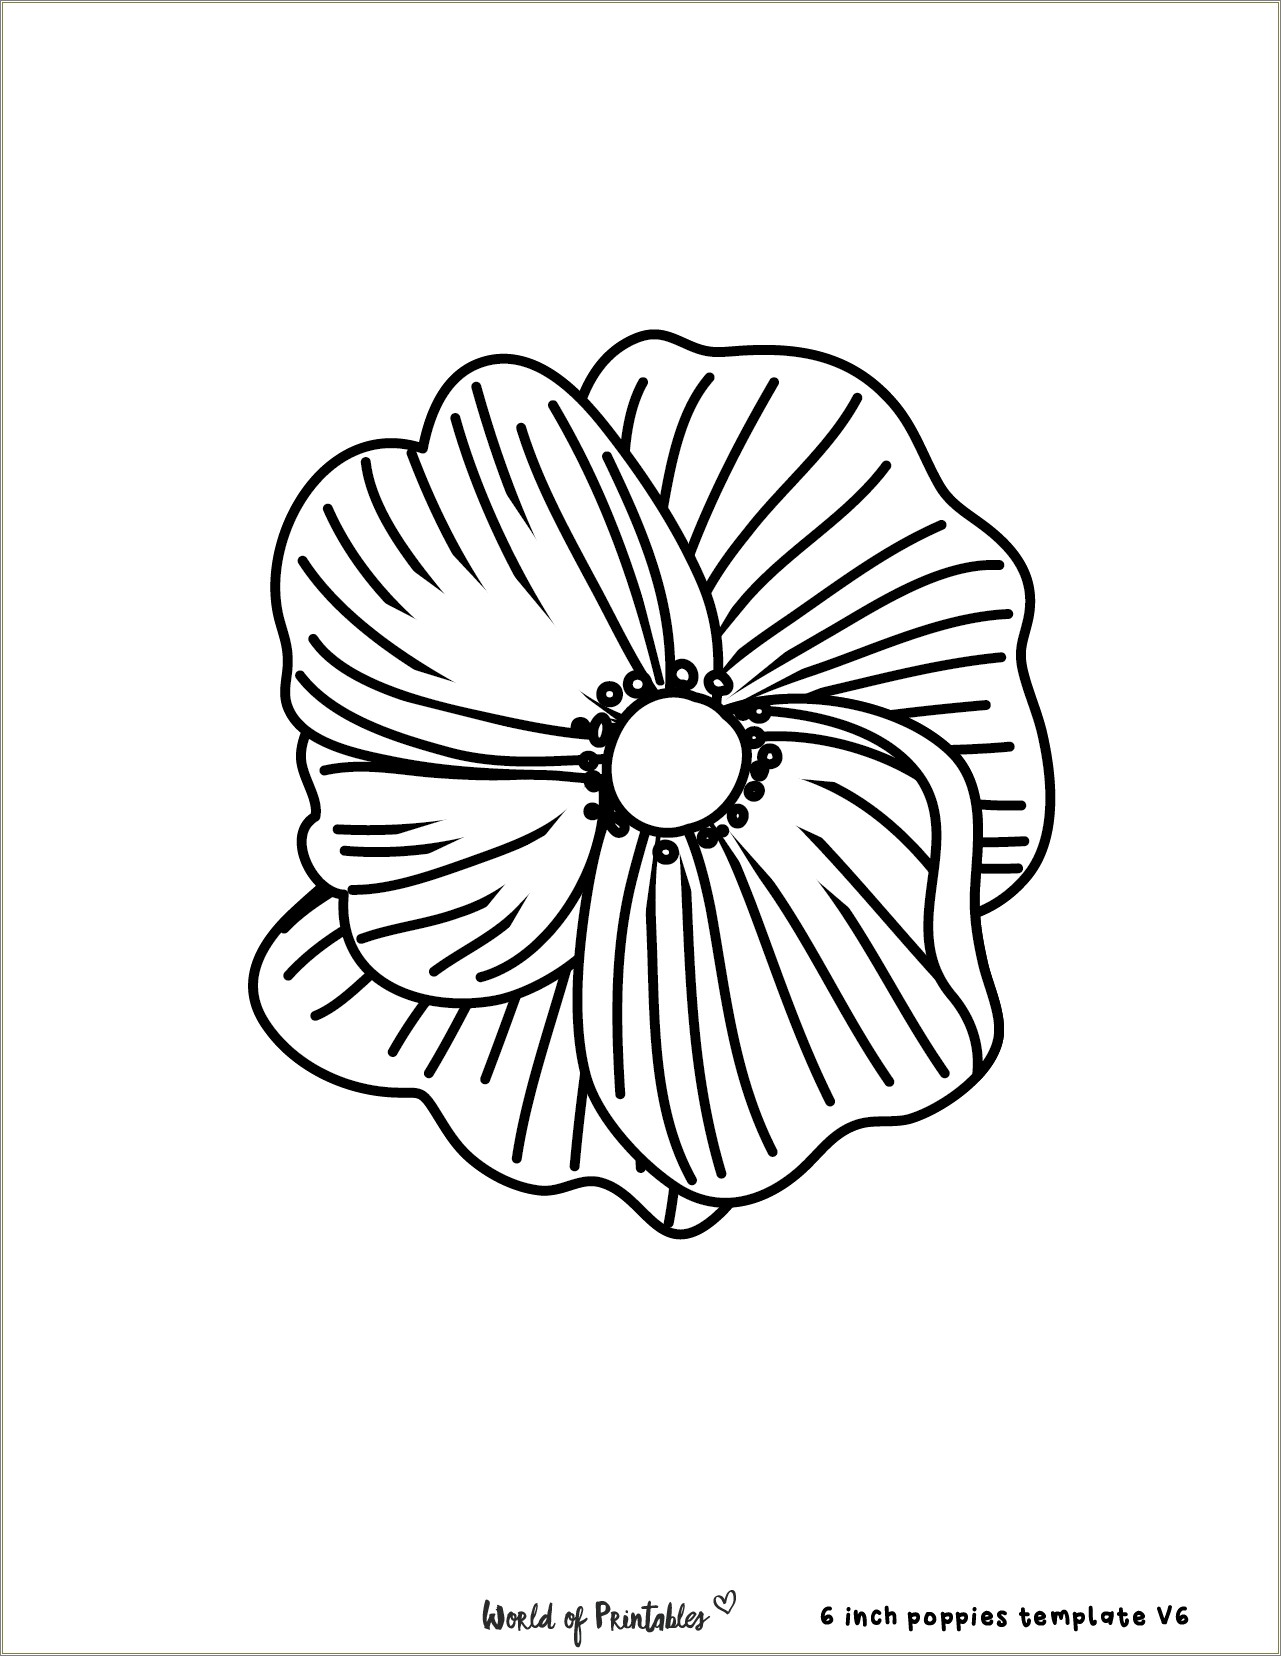 Free Poppy Template To Cut Out